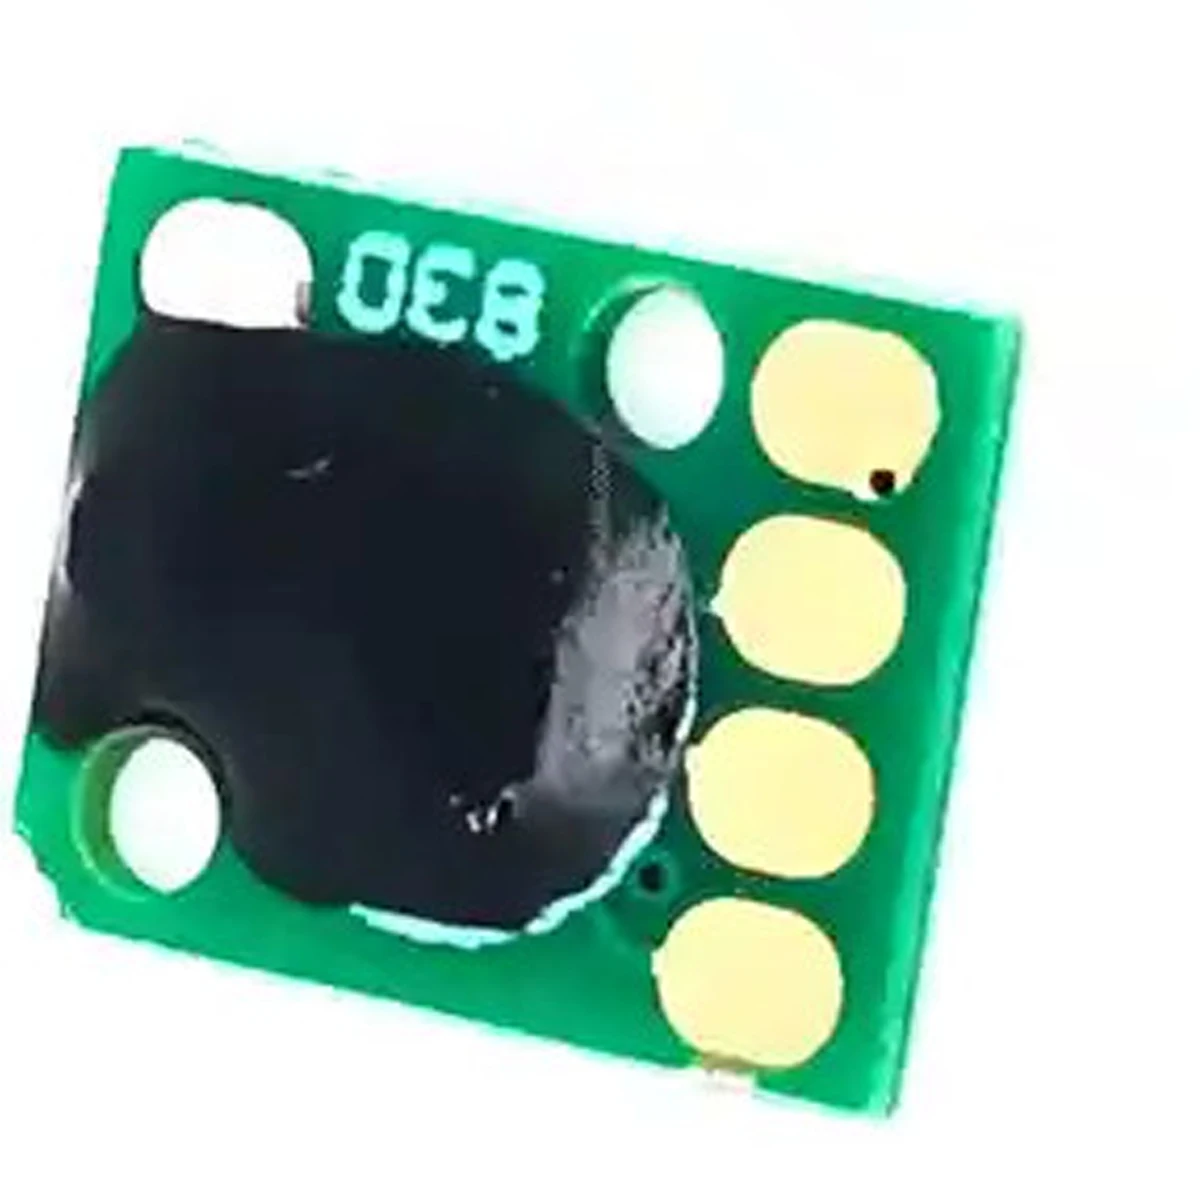 

Photoconductor Image Imaging Unit Drum Chip FOR Canon IR ImageRunner Advance DX DX6860 i DX6870 i DX6855 iMFP DX6860 iMFP